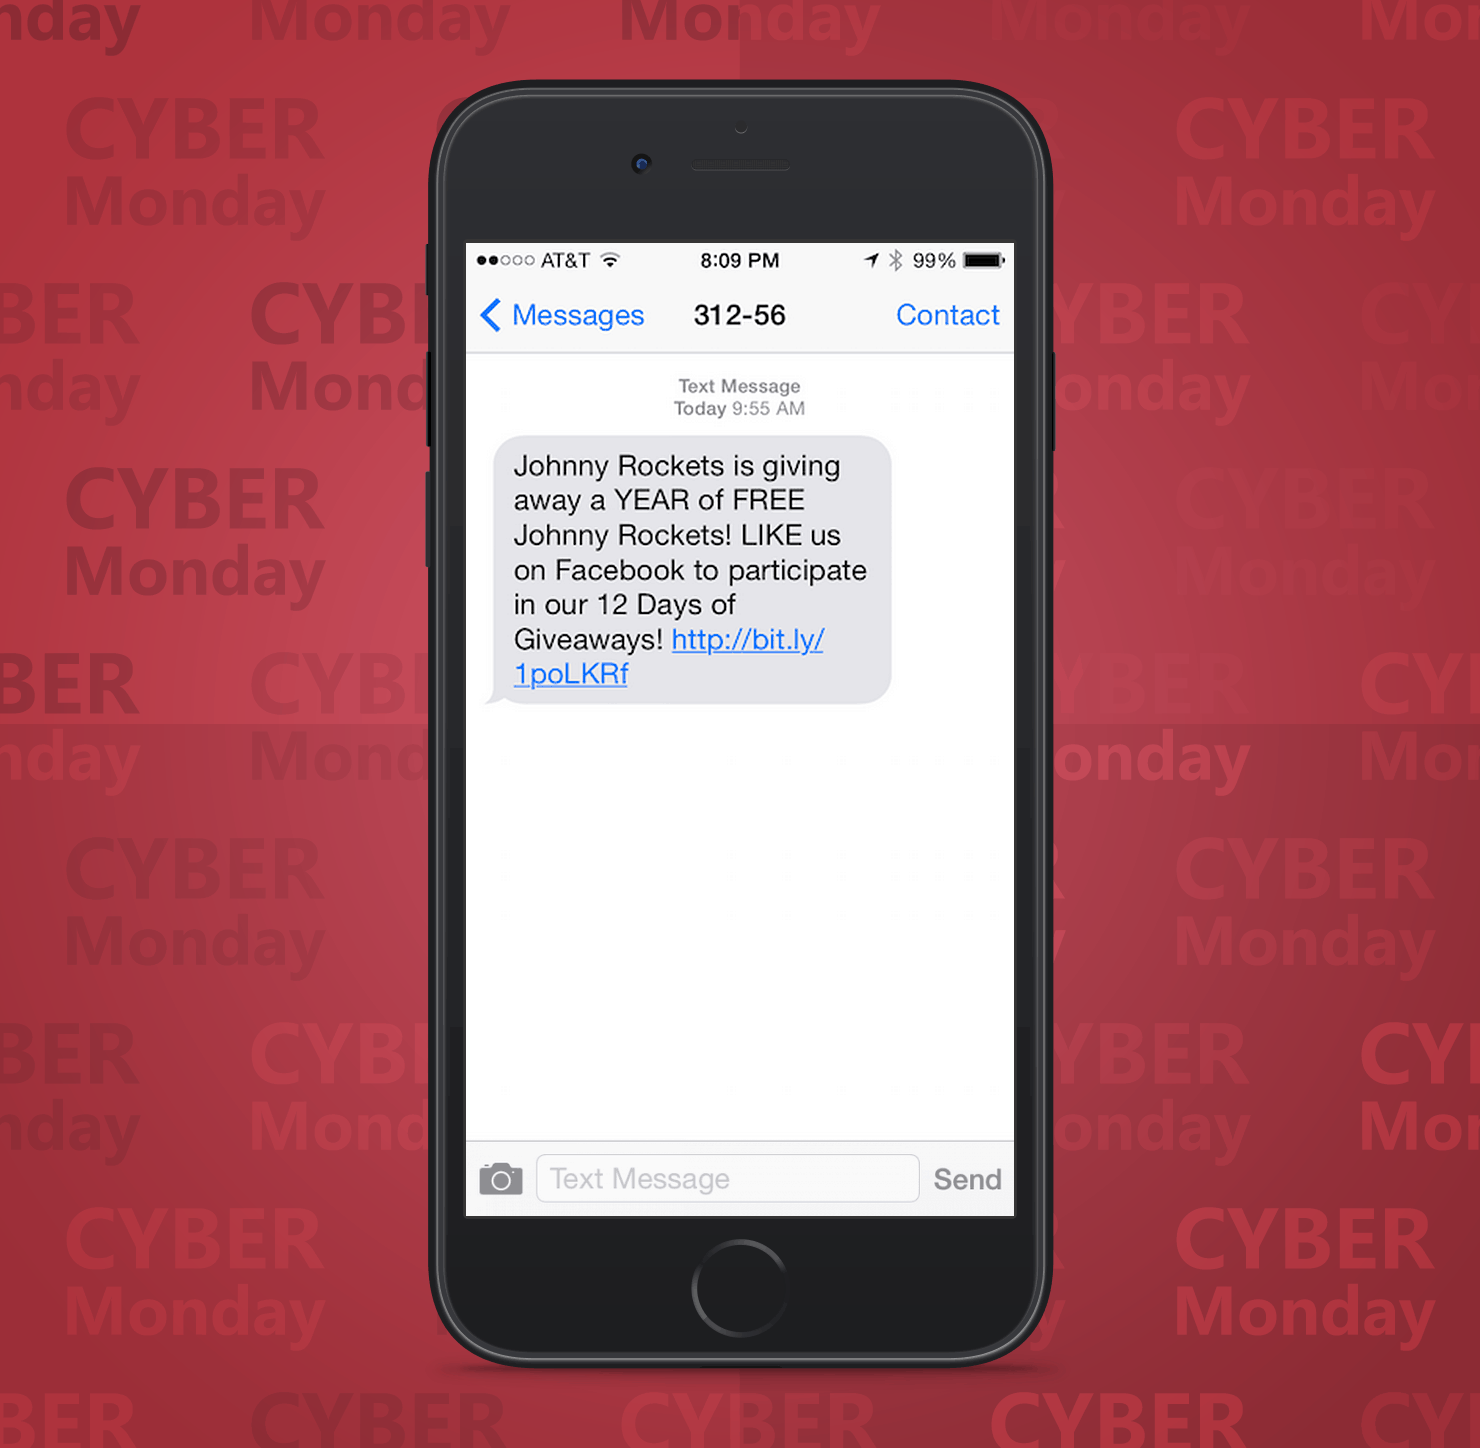 SMS Coupon Example Sent on Cyber Monday From Johnny Rocket Restaurants to Customers